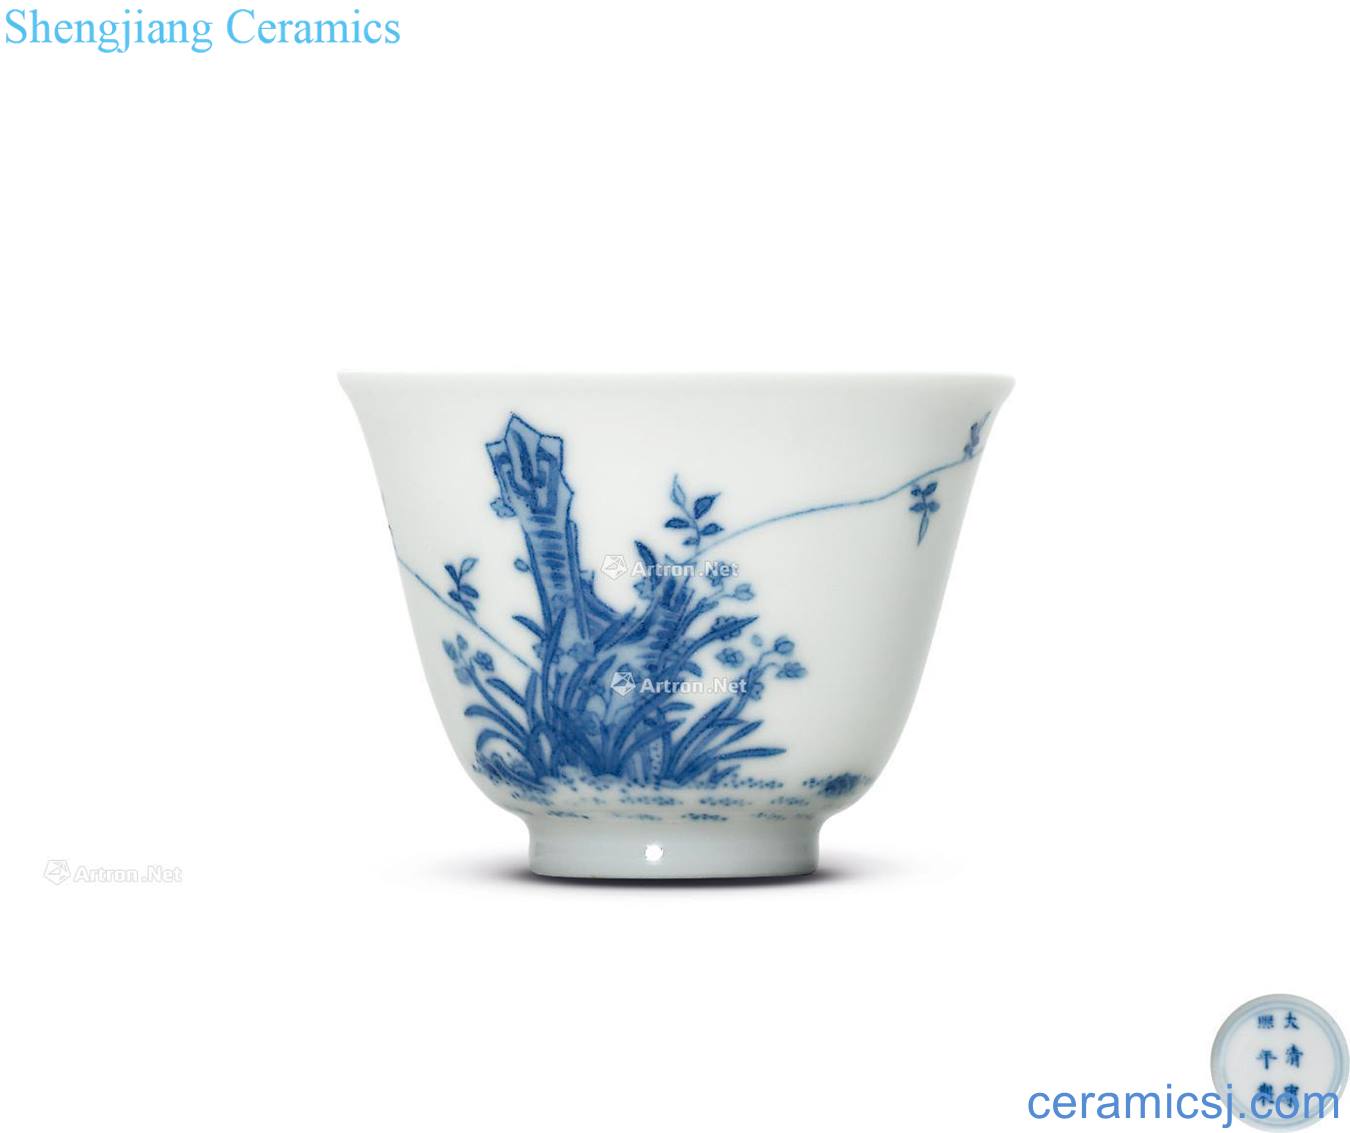 The qing emperor kangxi porcelain "narcissus" god of cup